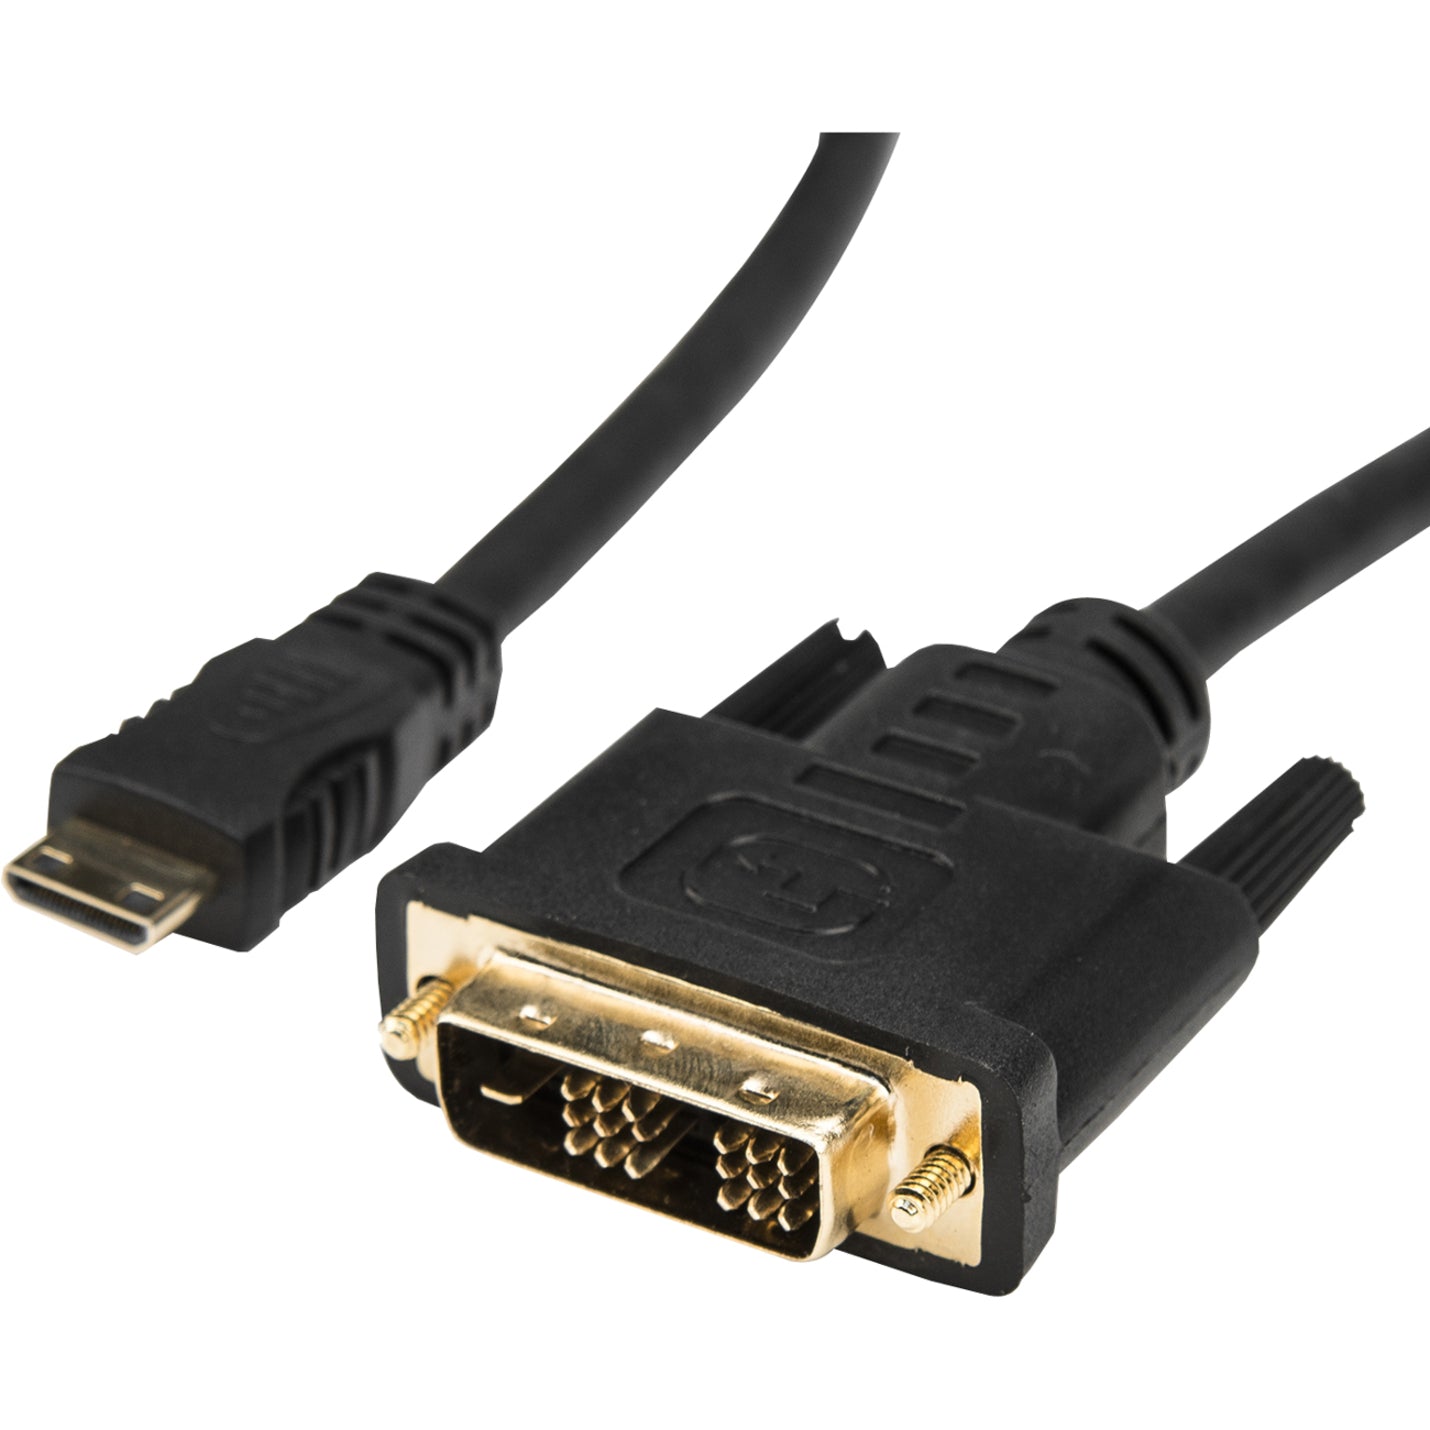 Rocstor Y10C248-B1 Premium 10ft Mini HDMI to DVI-D Cable - M/M, Molded, 1920 x 1200 Supported Resolution